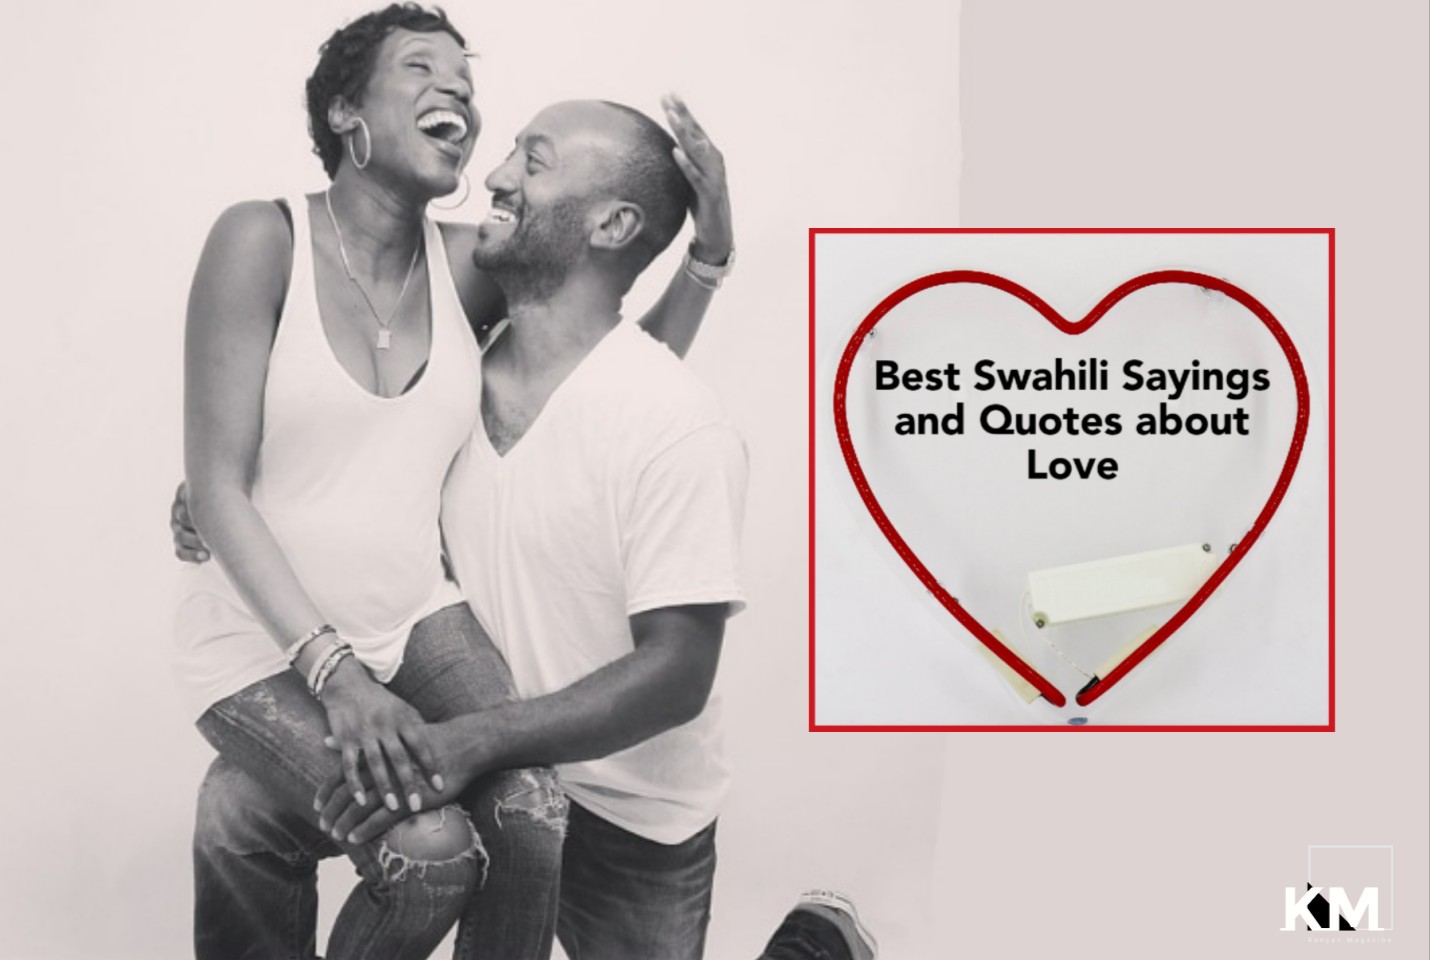 Best Swahili Sayings and Quotes About Love